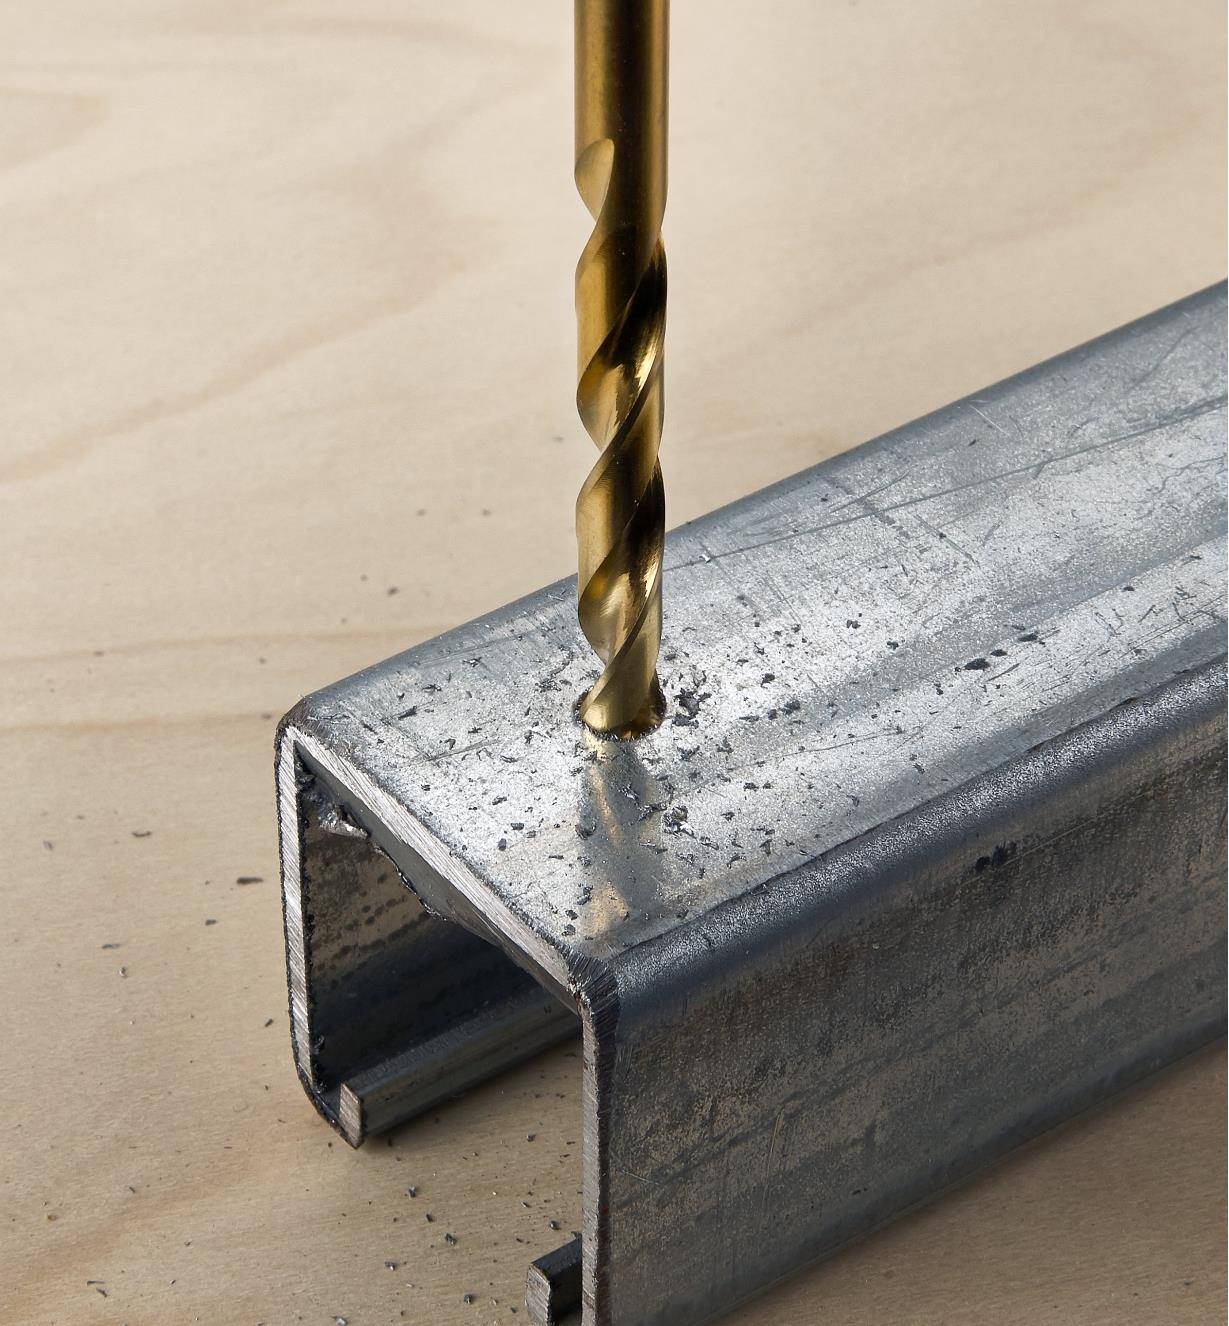 A close view of a hex-shank twist drill bit being used to drill a hole in a piece of steel U-channel